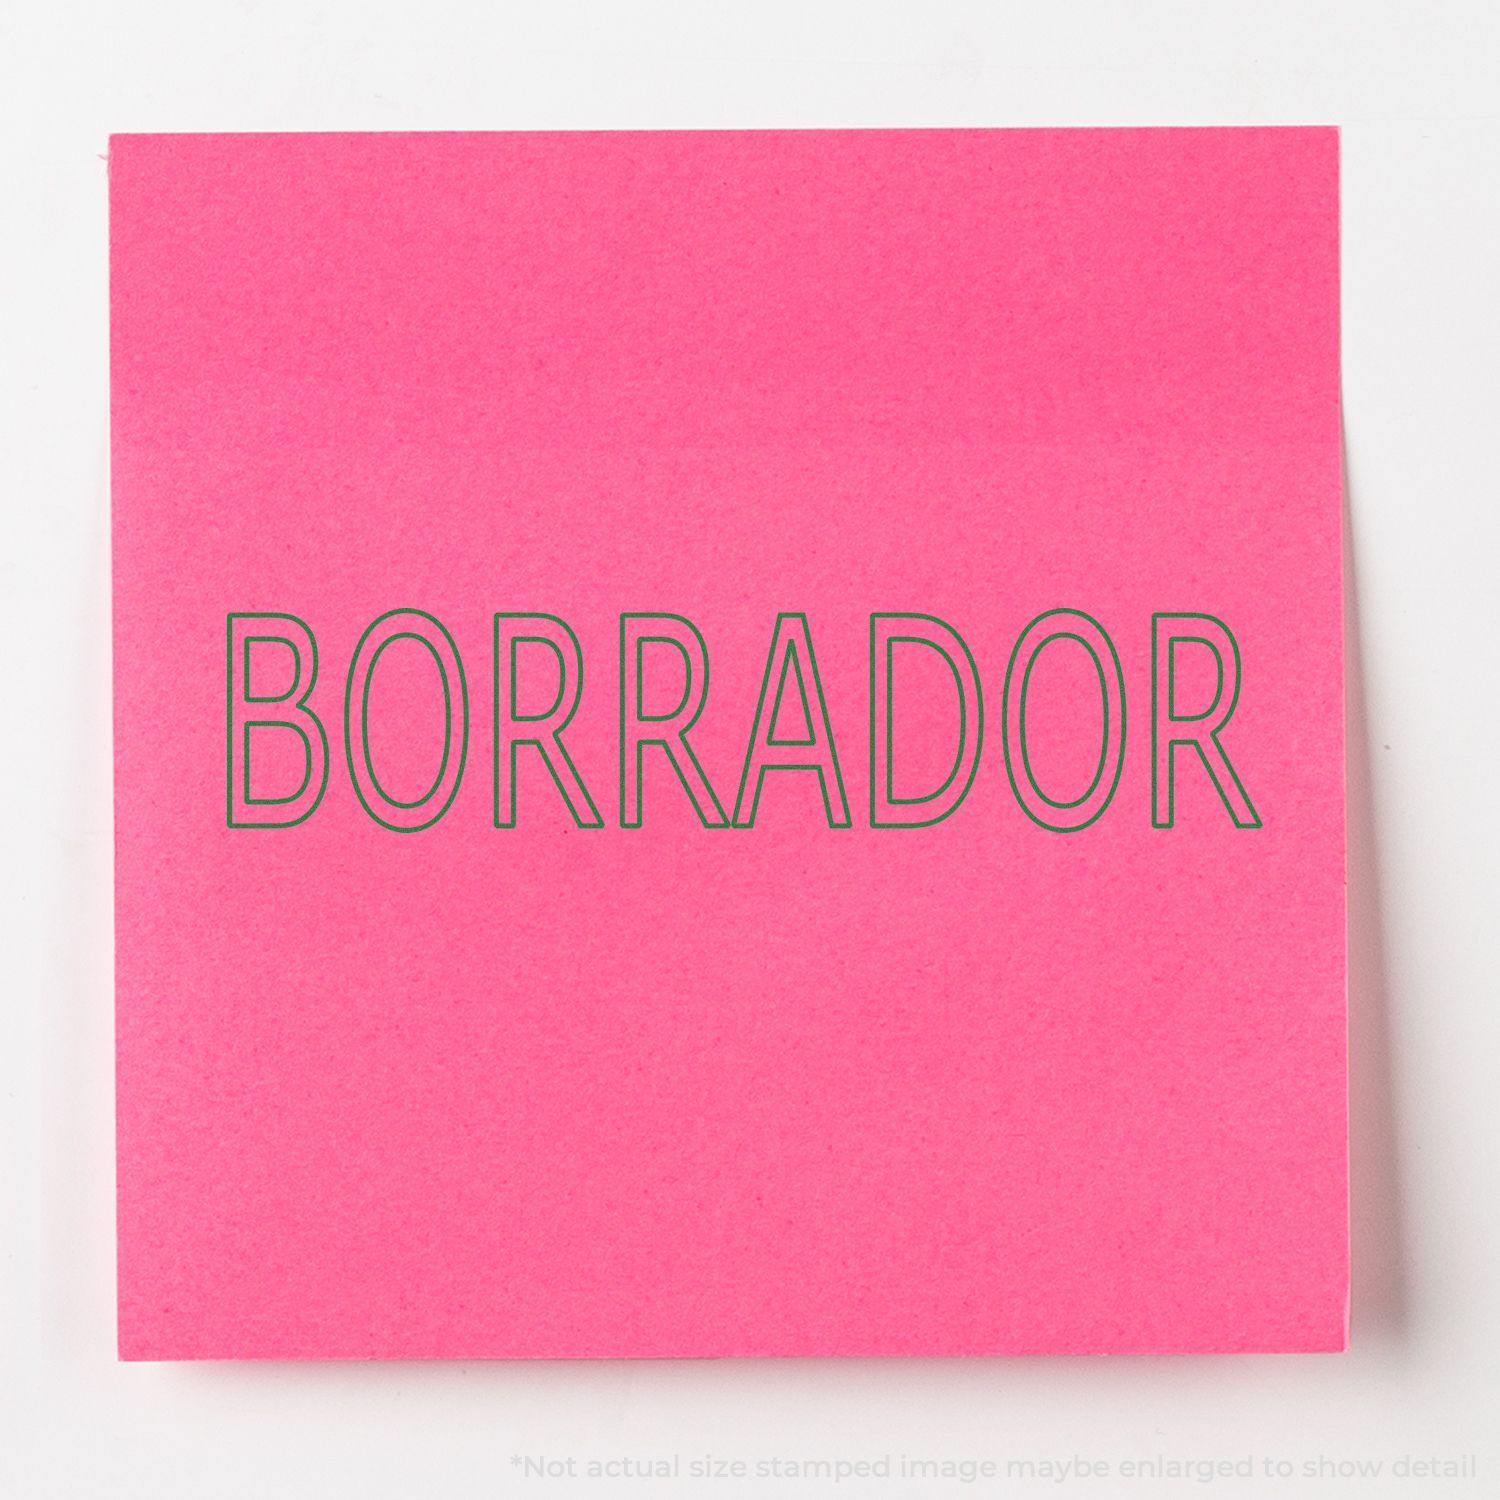 A self-inking stamp with a stamped image showing how the text "BORRADOR" in an outline style is displayed after stamping.